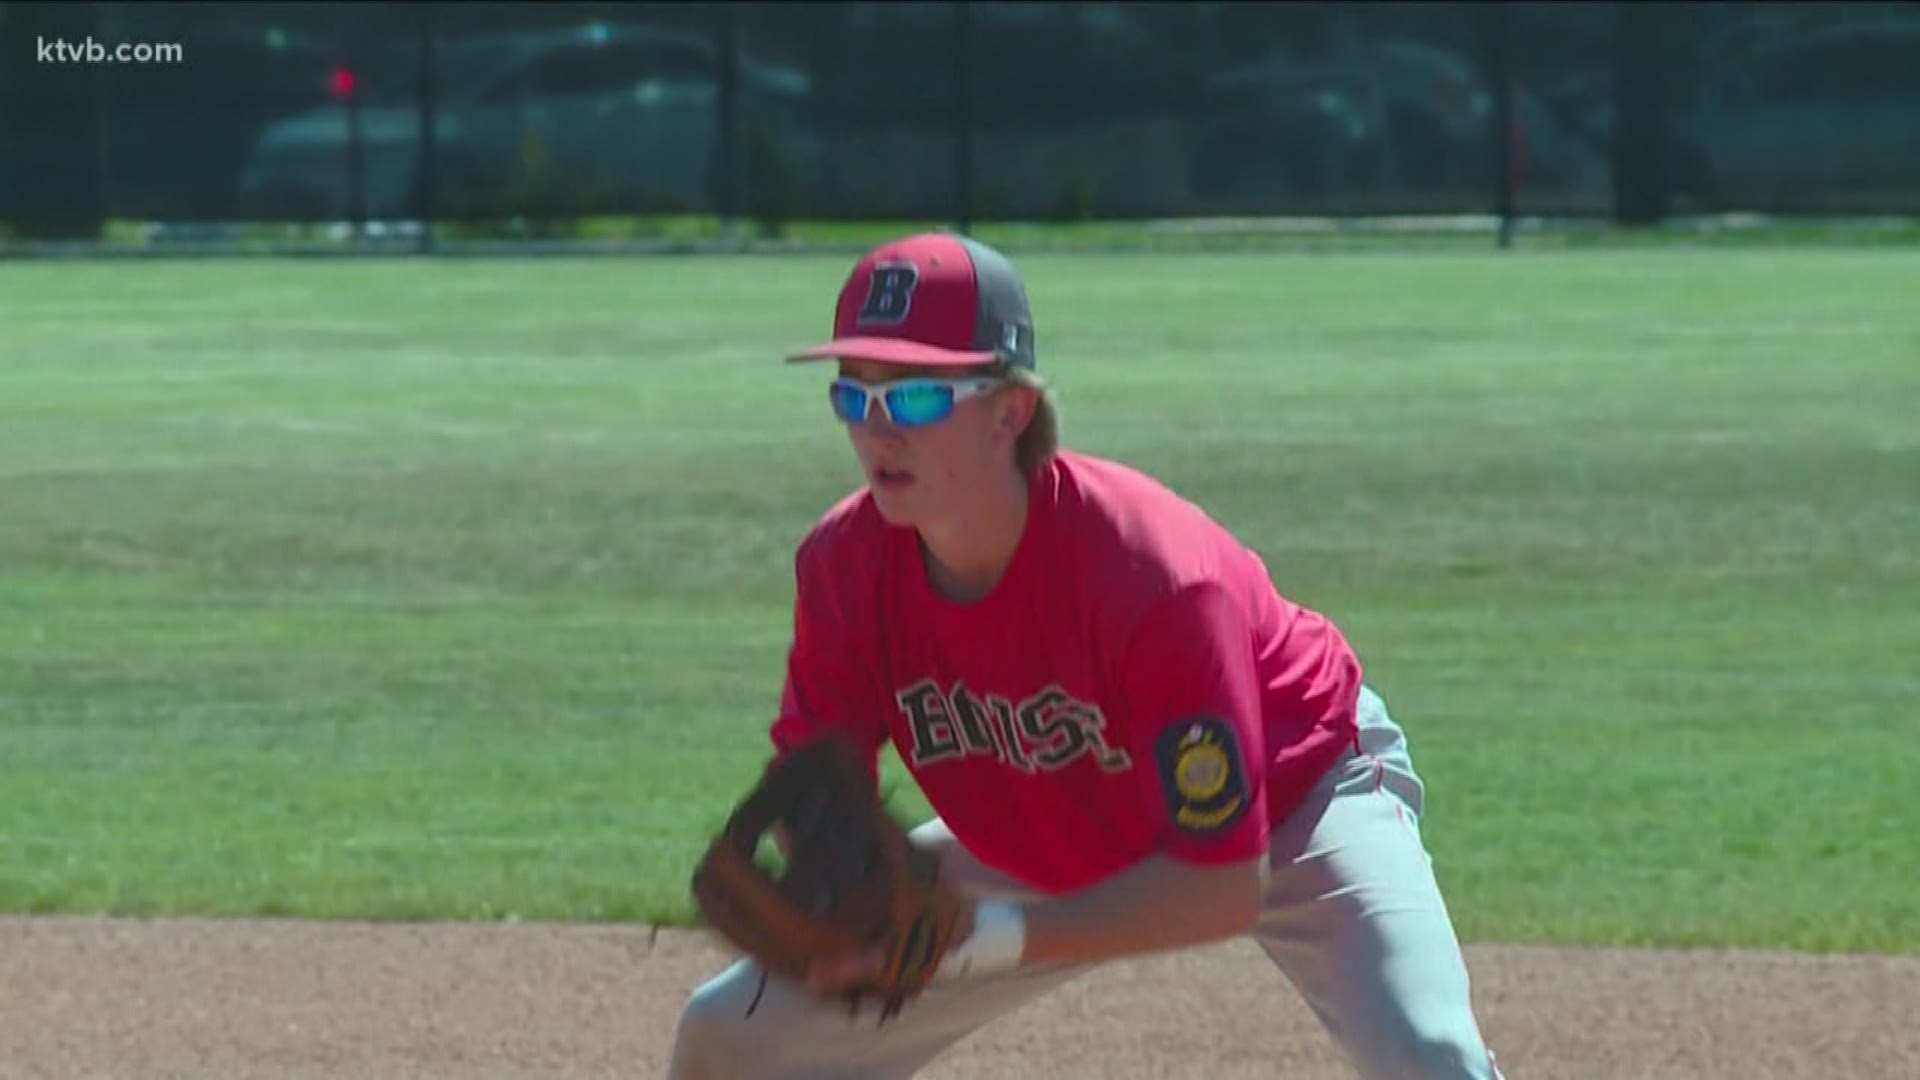 The Boise Braves, who at one point this season went 0-14, will face Rocky Mountain in the first round of the 2019 state baseball championships after winning three in a row.